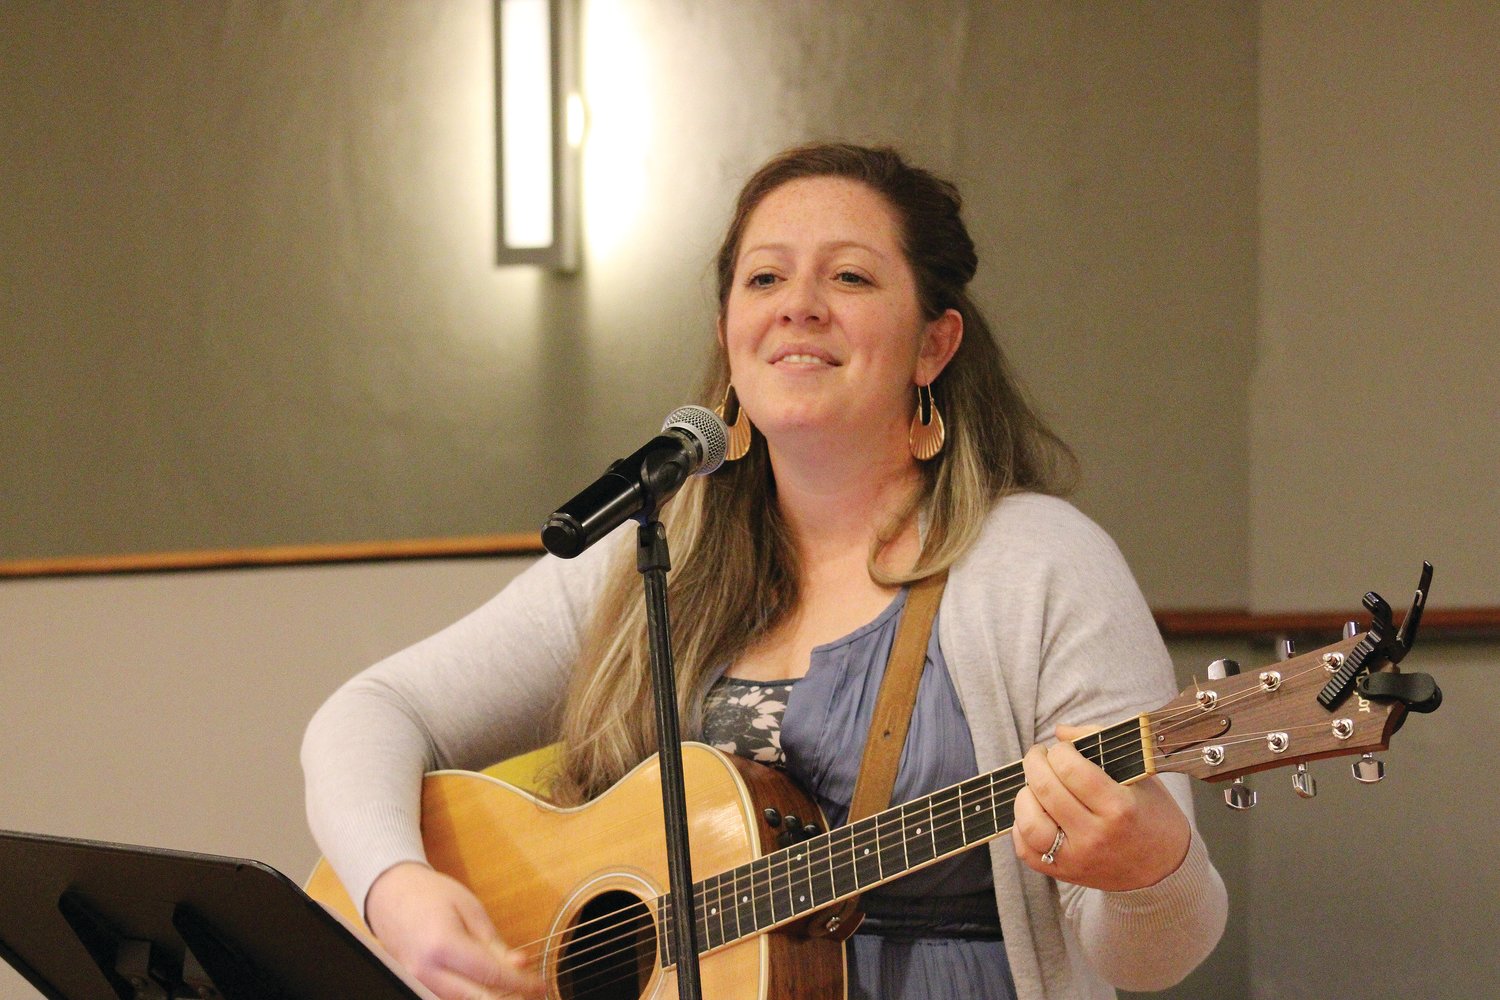 A music ministry of prayer and song was led by Liz Cotrupi Pfunder, a national Catholic musician, songwriter and speaker.